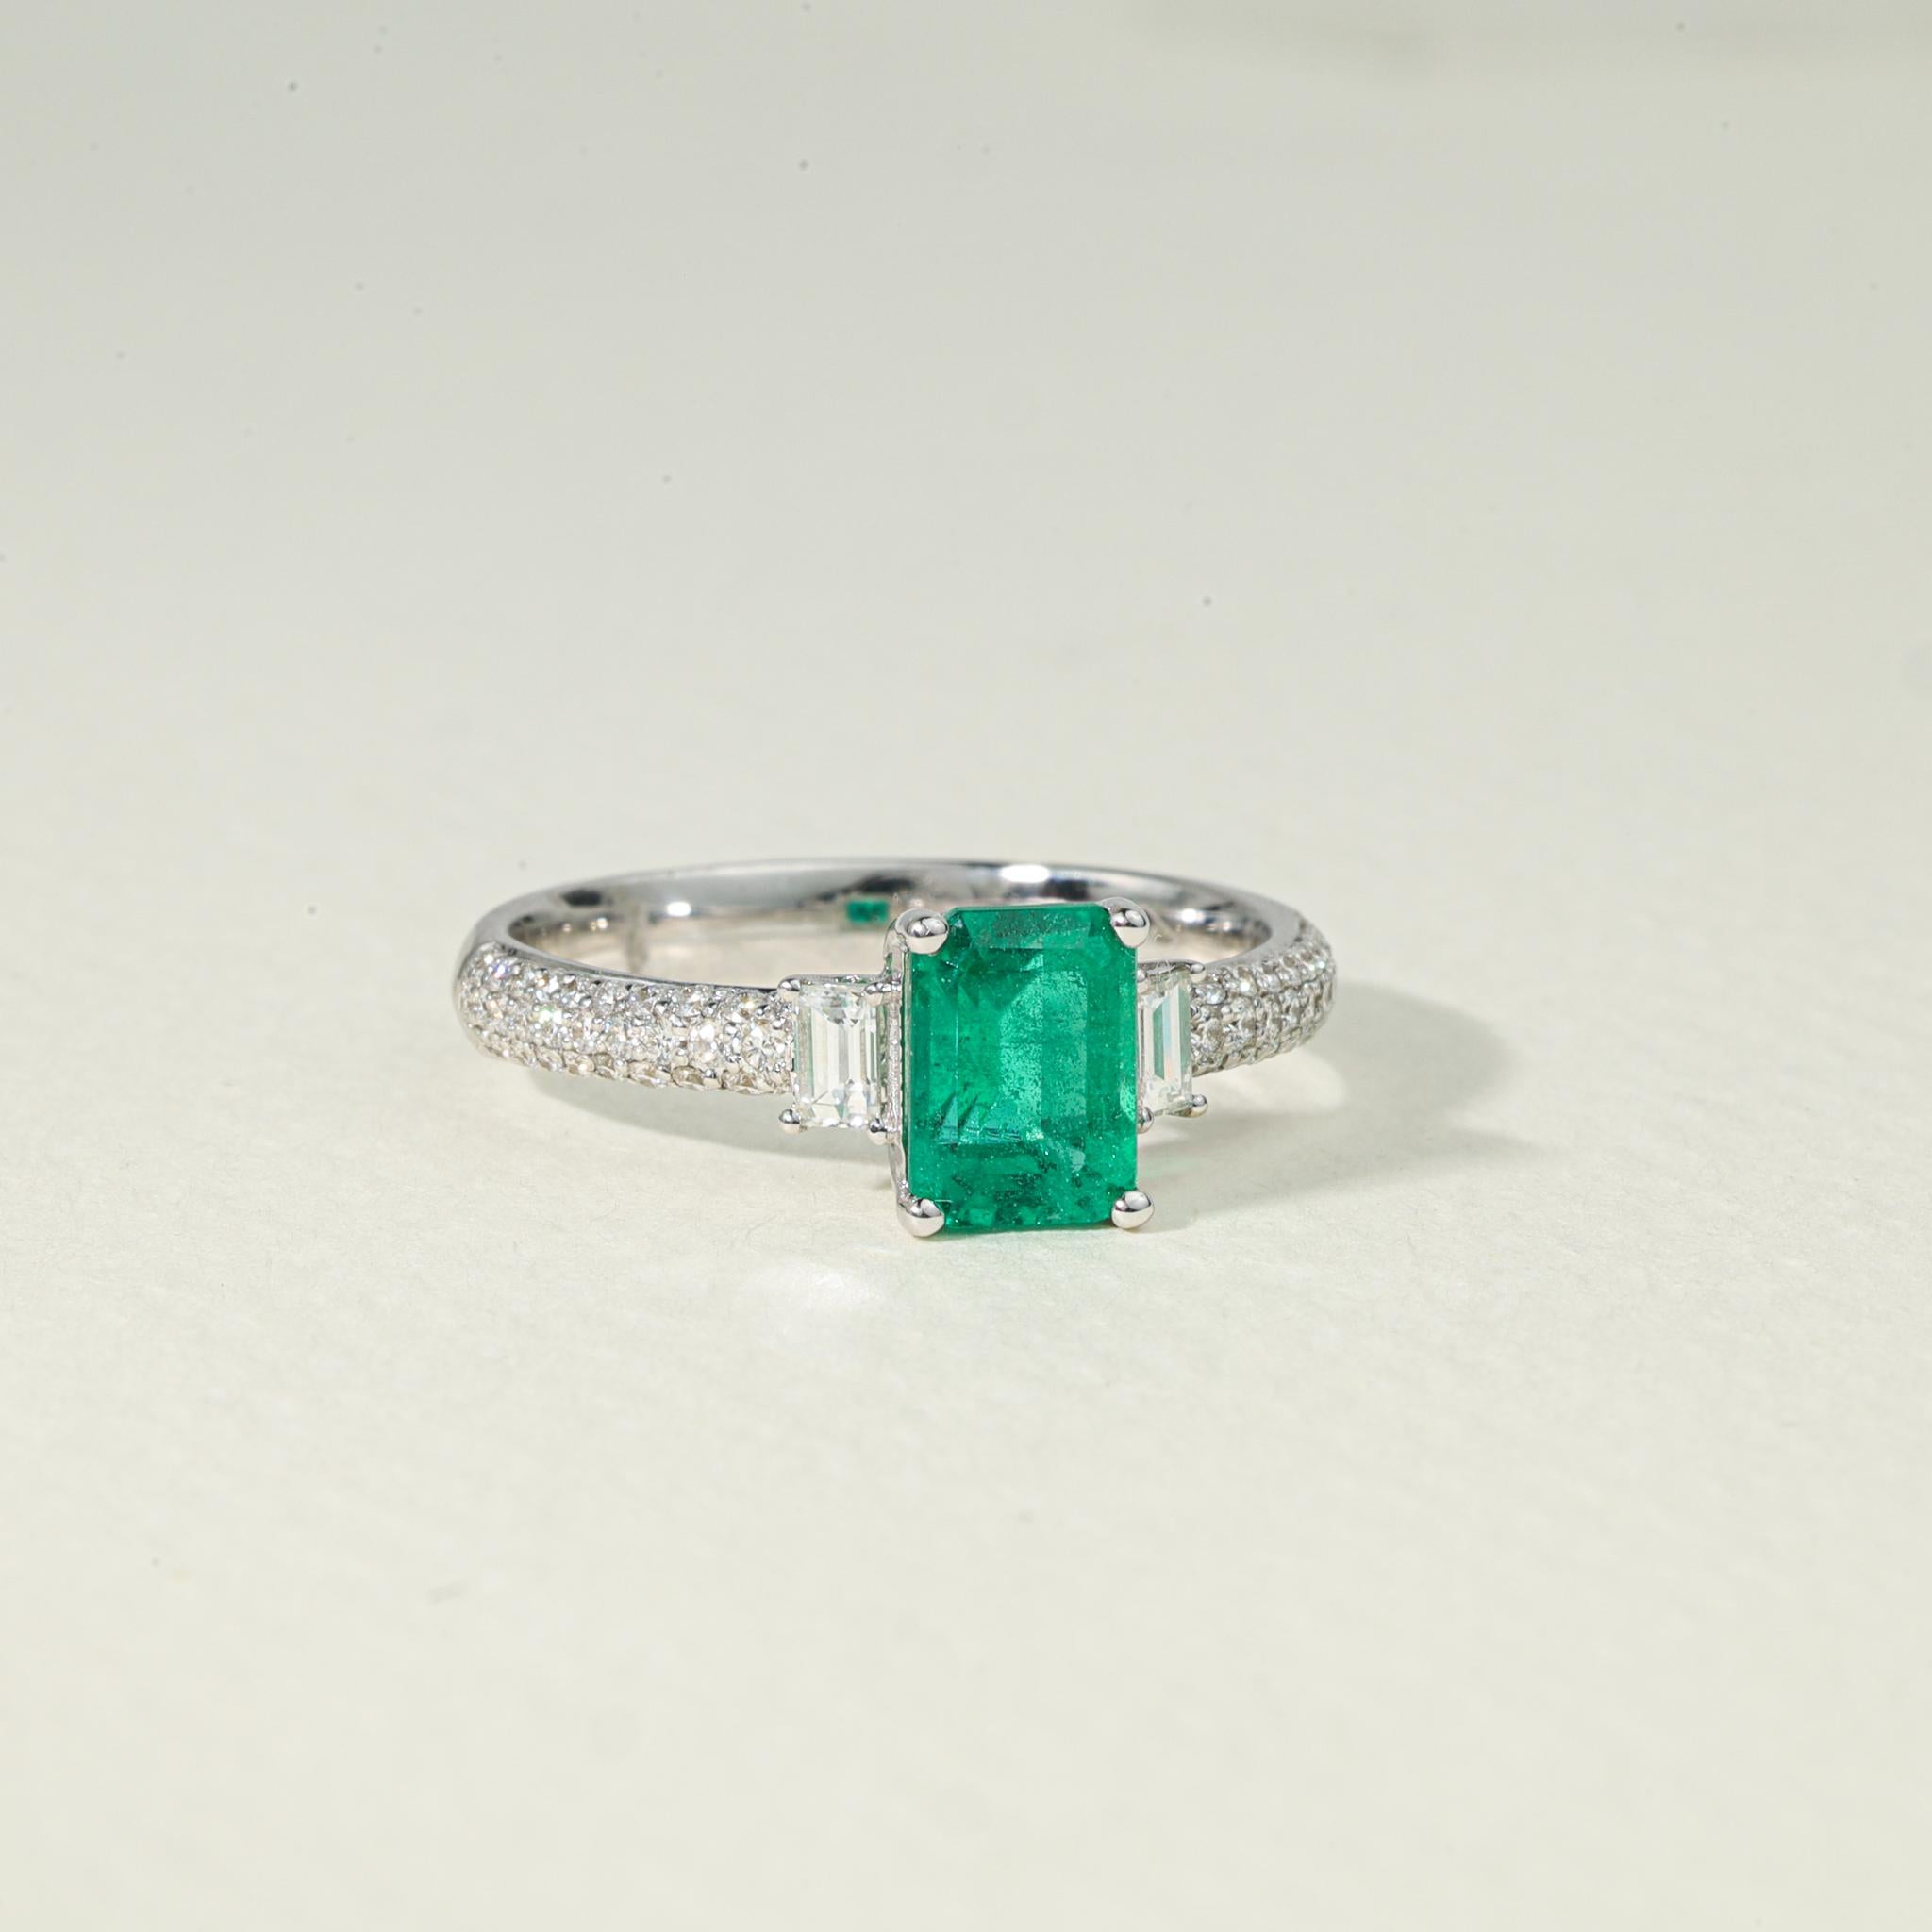 Emerald Cut Natural Emerald Diamond Cocktail Engagement Ring 18k White Gold In New Condition For Sale In Jaipur, RJ